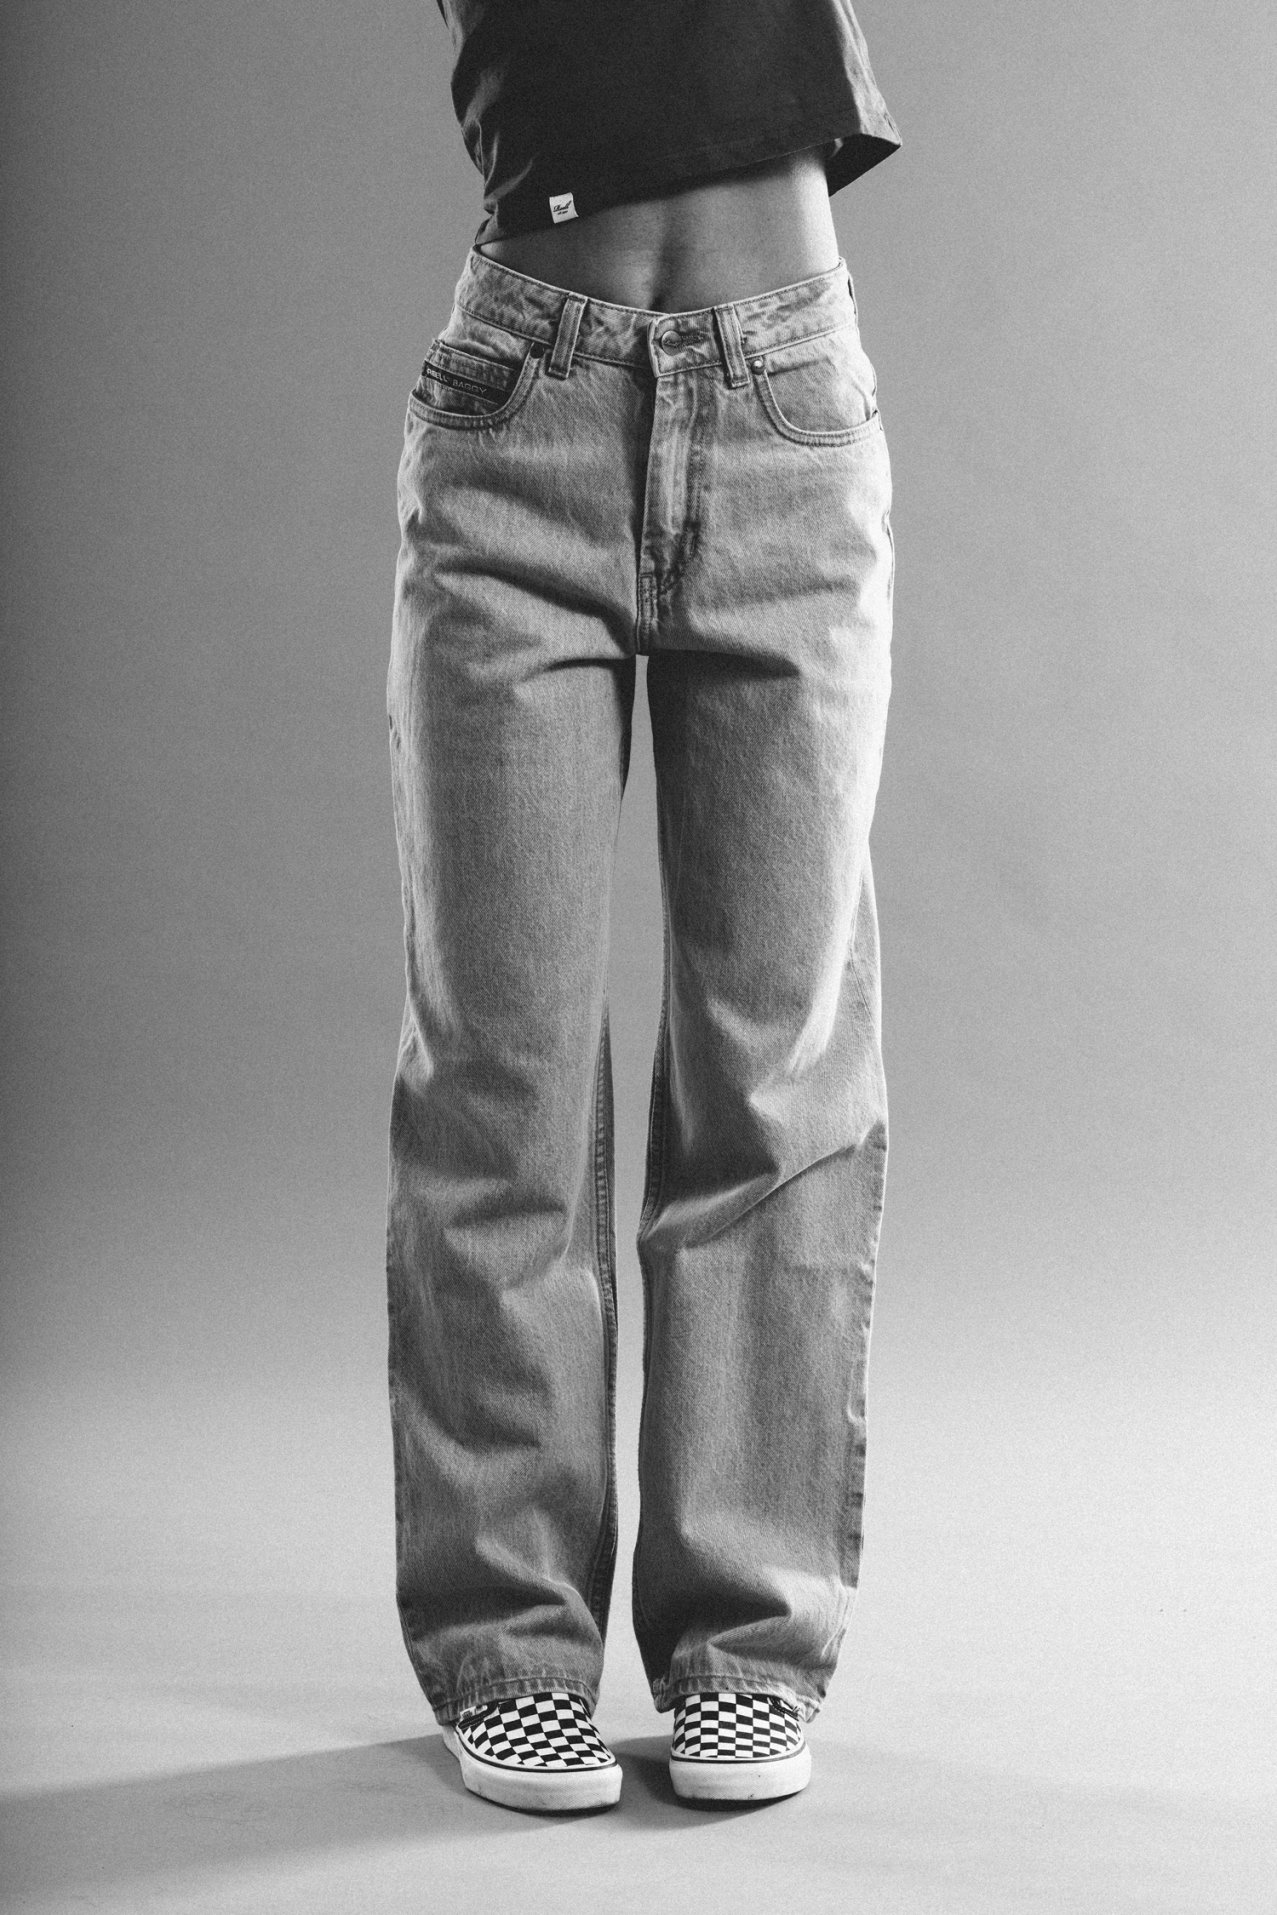 REELL Baggy Jeans - Buy now